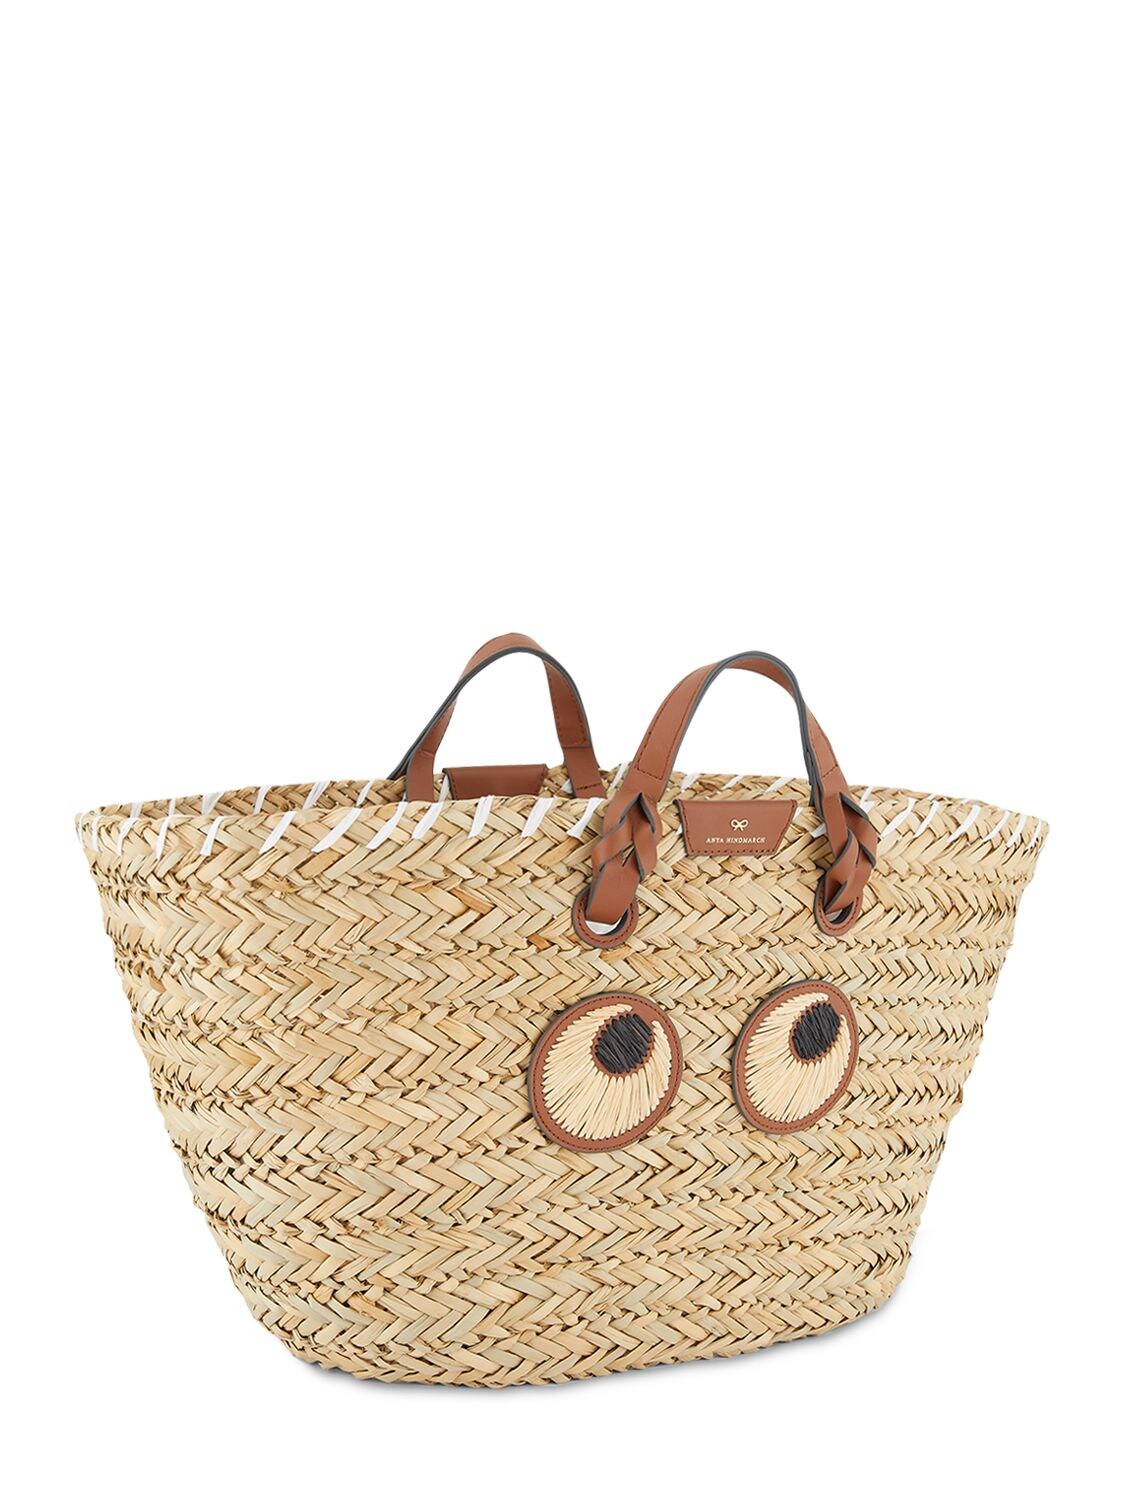 Anya Hindmarch Large Paper Eyes Seagrass Top Handle Bag In Natural